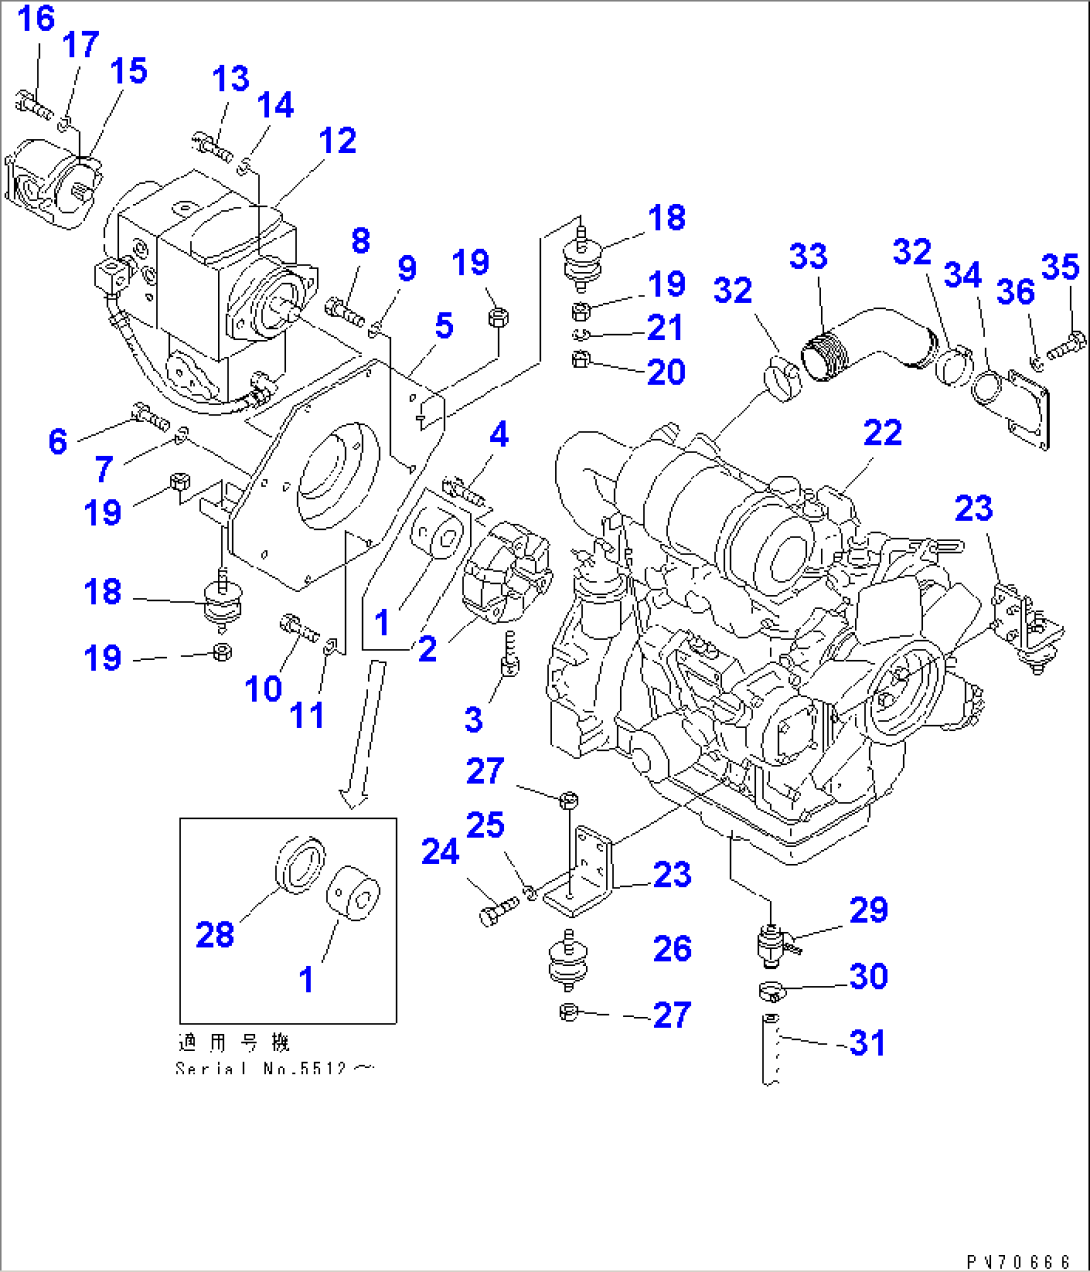 ENGINE AND MAIN PUMP MOUNTING PARTS(#5497-)